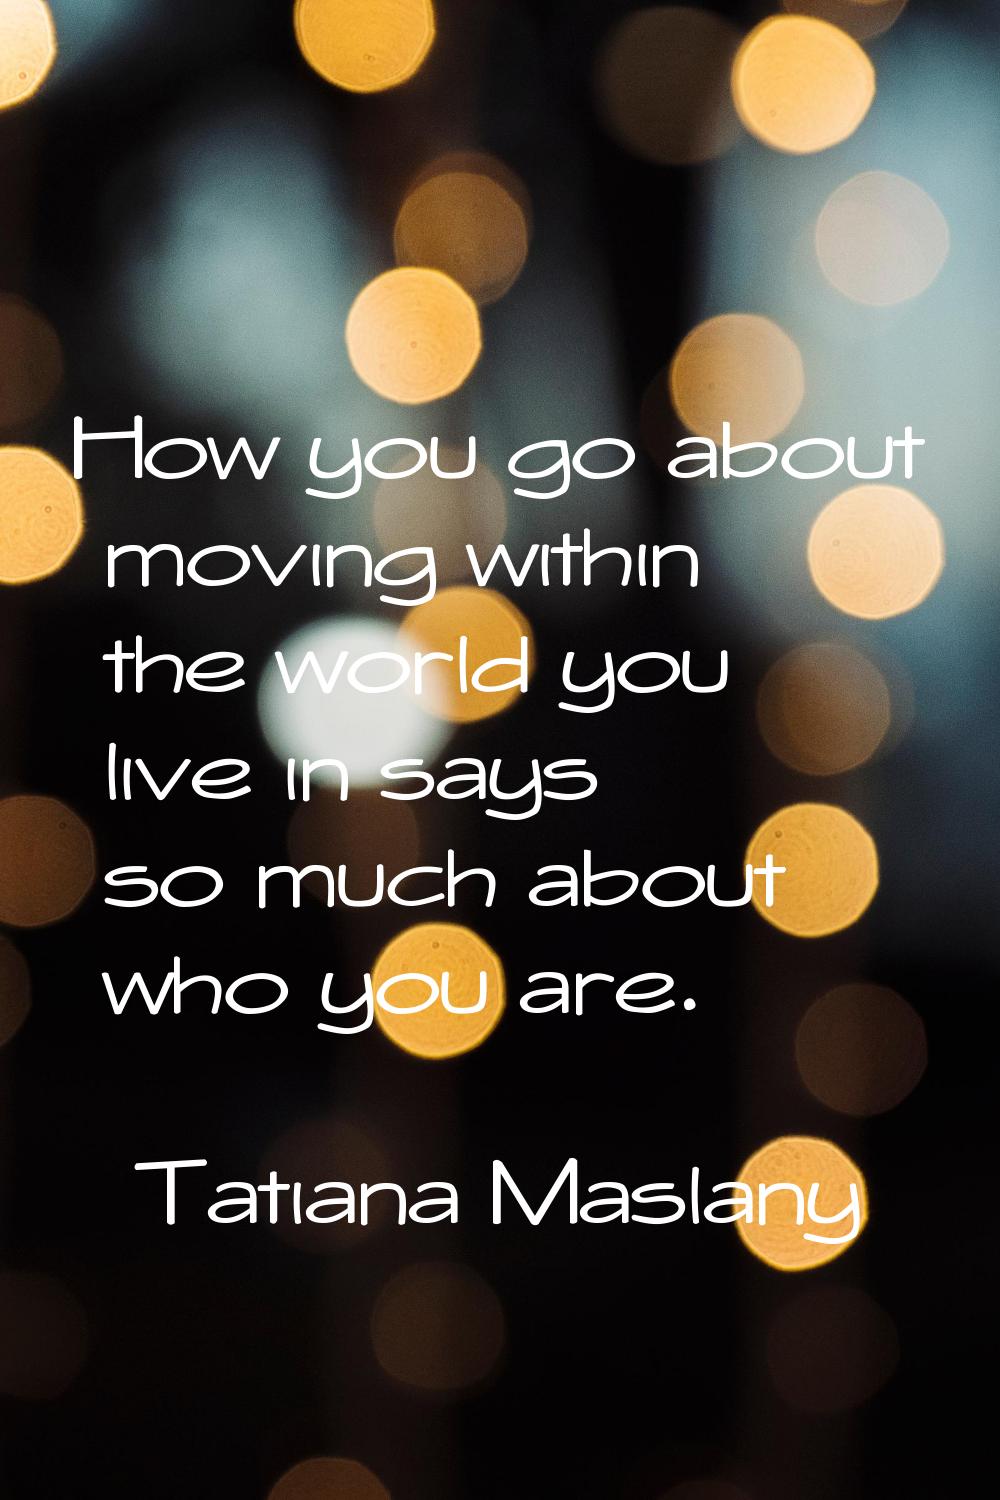 How you go about moving within the world you live in says so much about who you are.